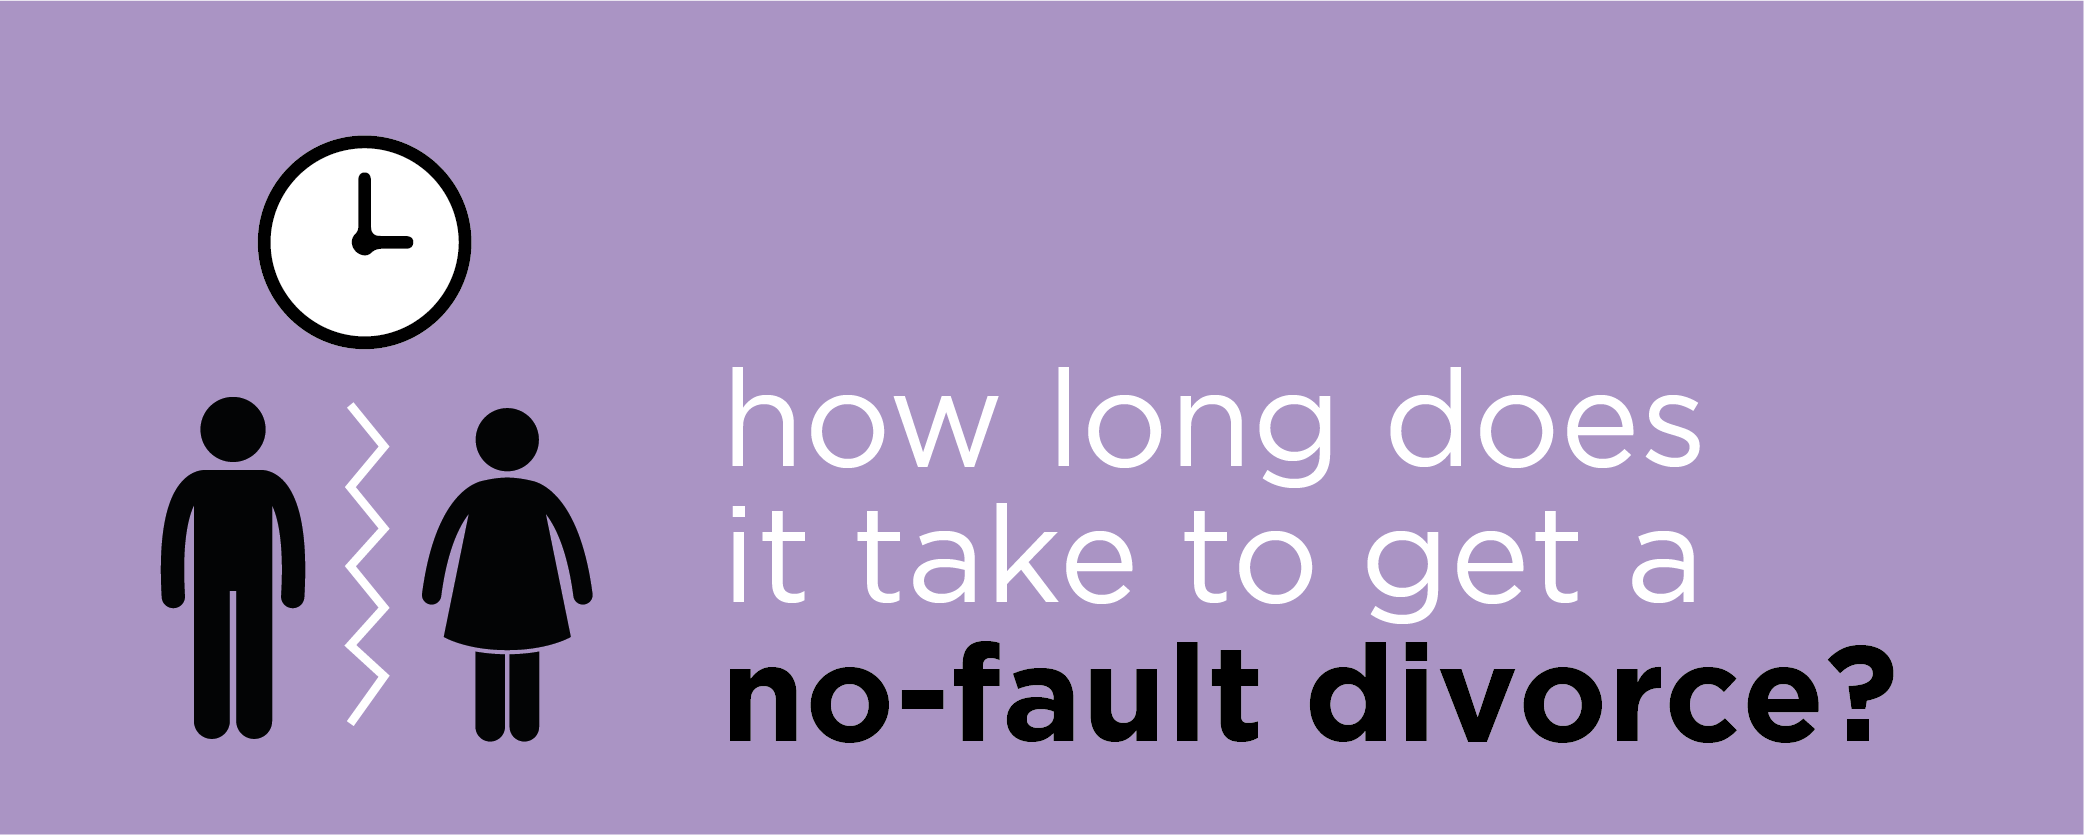 How long does it take to get a no-fault divorce?